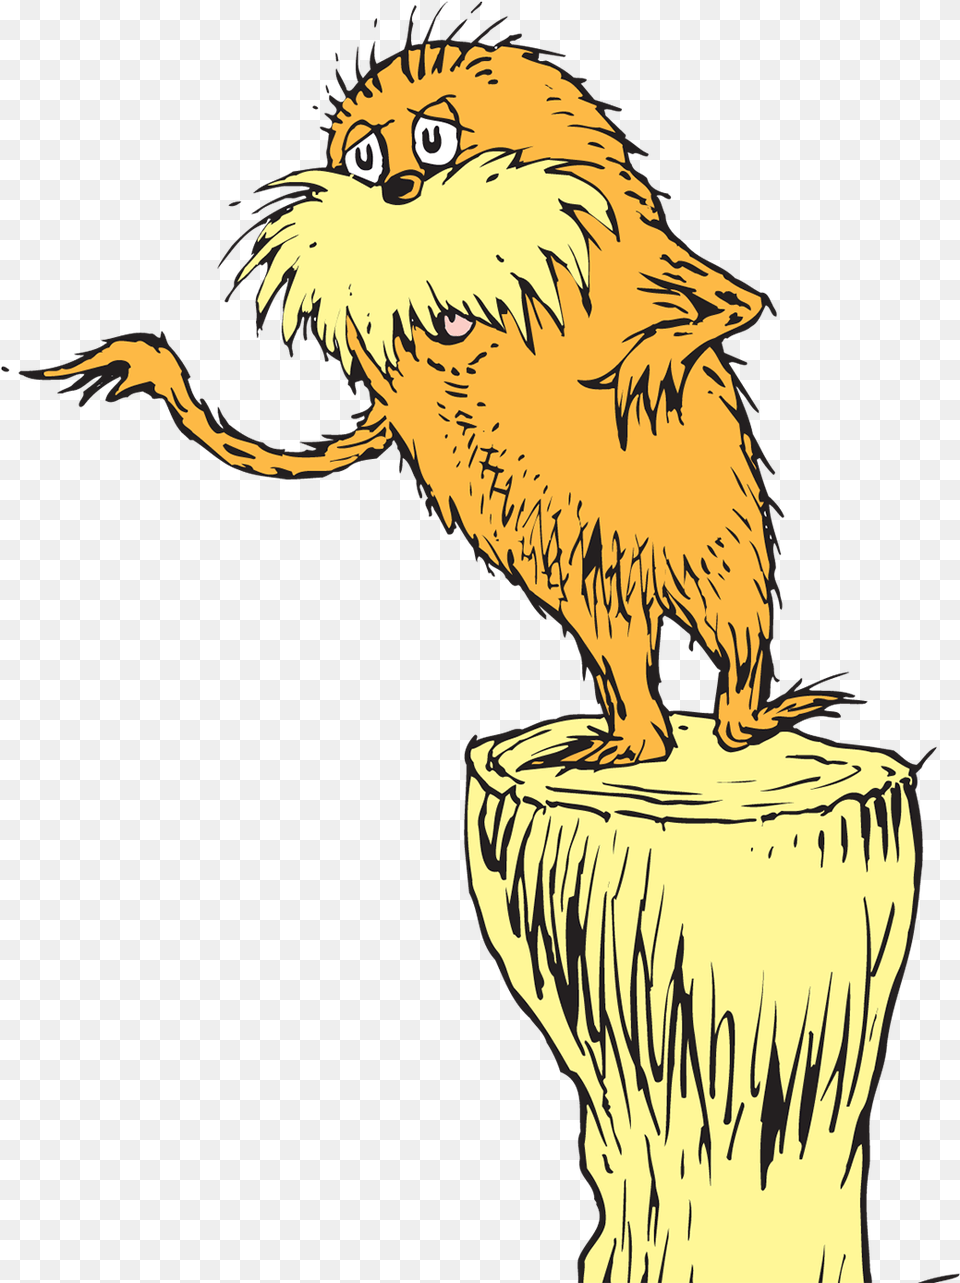 Download Clipart Resolution Lorax On Tree Stump, Plant, Animal, Wildlife, Lion Free Transparent Png